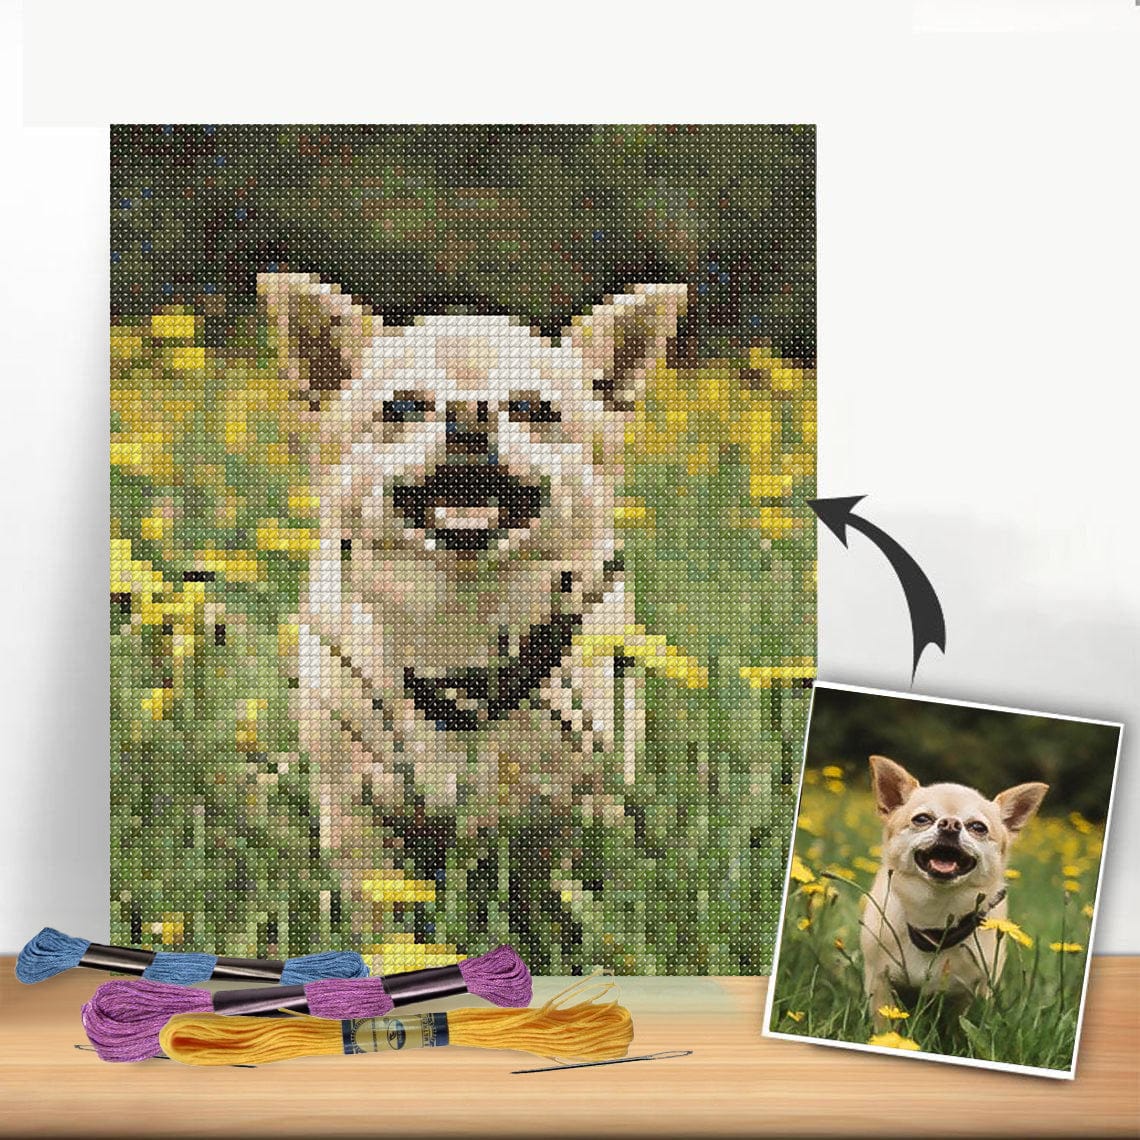 Cross Stitch | Basset Hound - Brown And White Short Coated Dog On Green Grass Field During Daytime - Cross Stitched